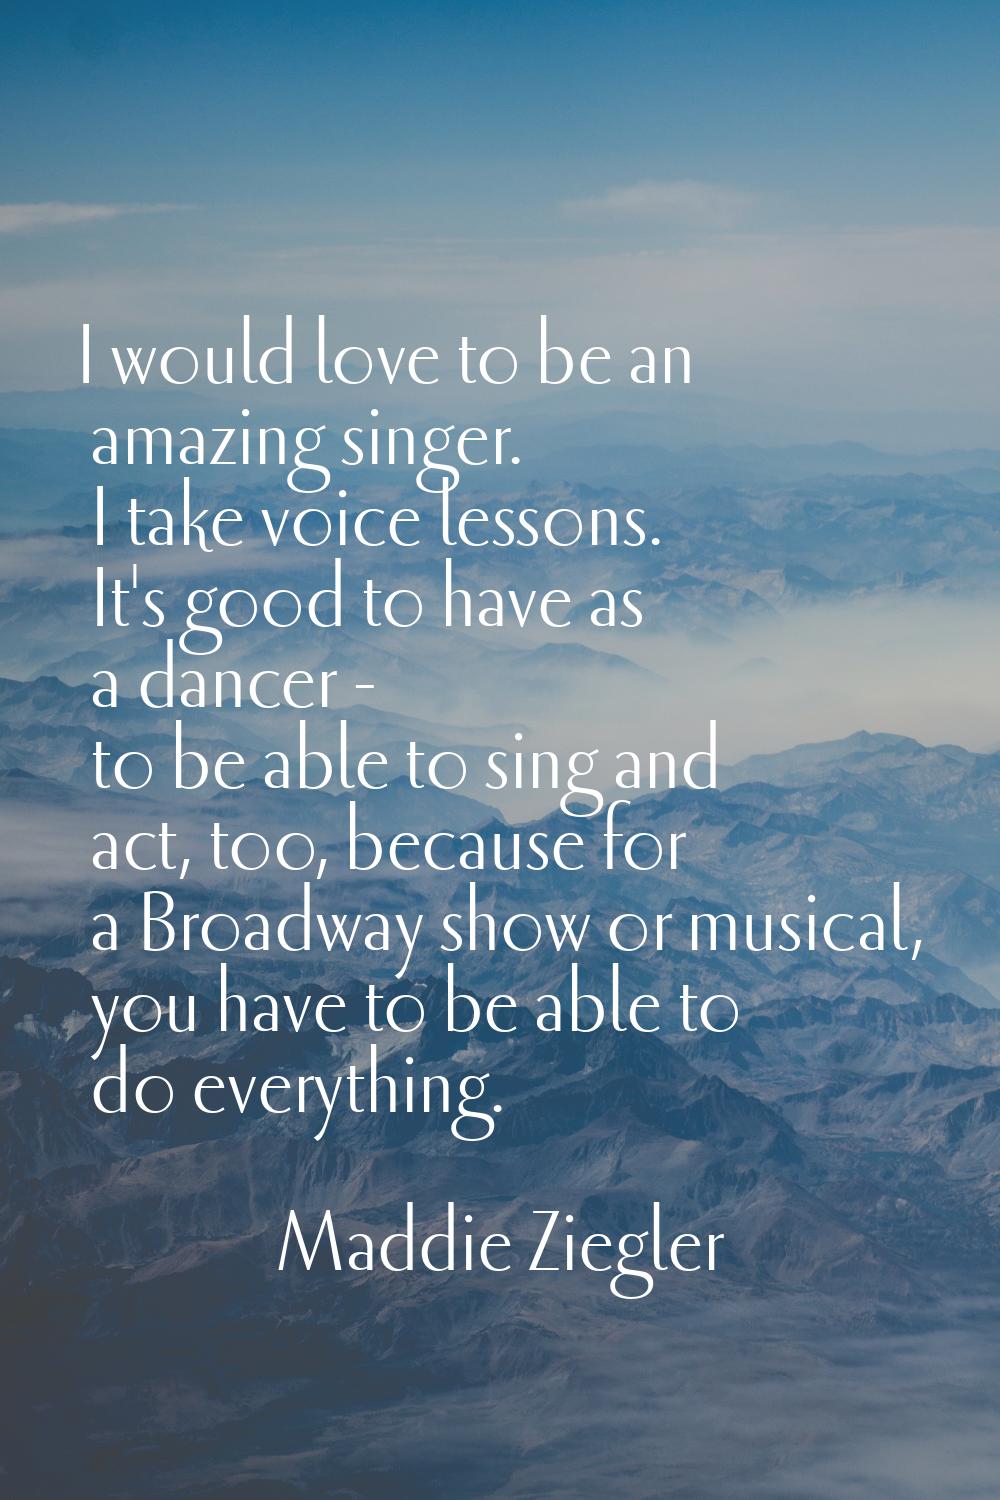 I would love to be an amazing singer. I take voice lessons. It's good to have as a dancer - to be a